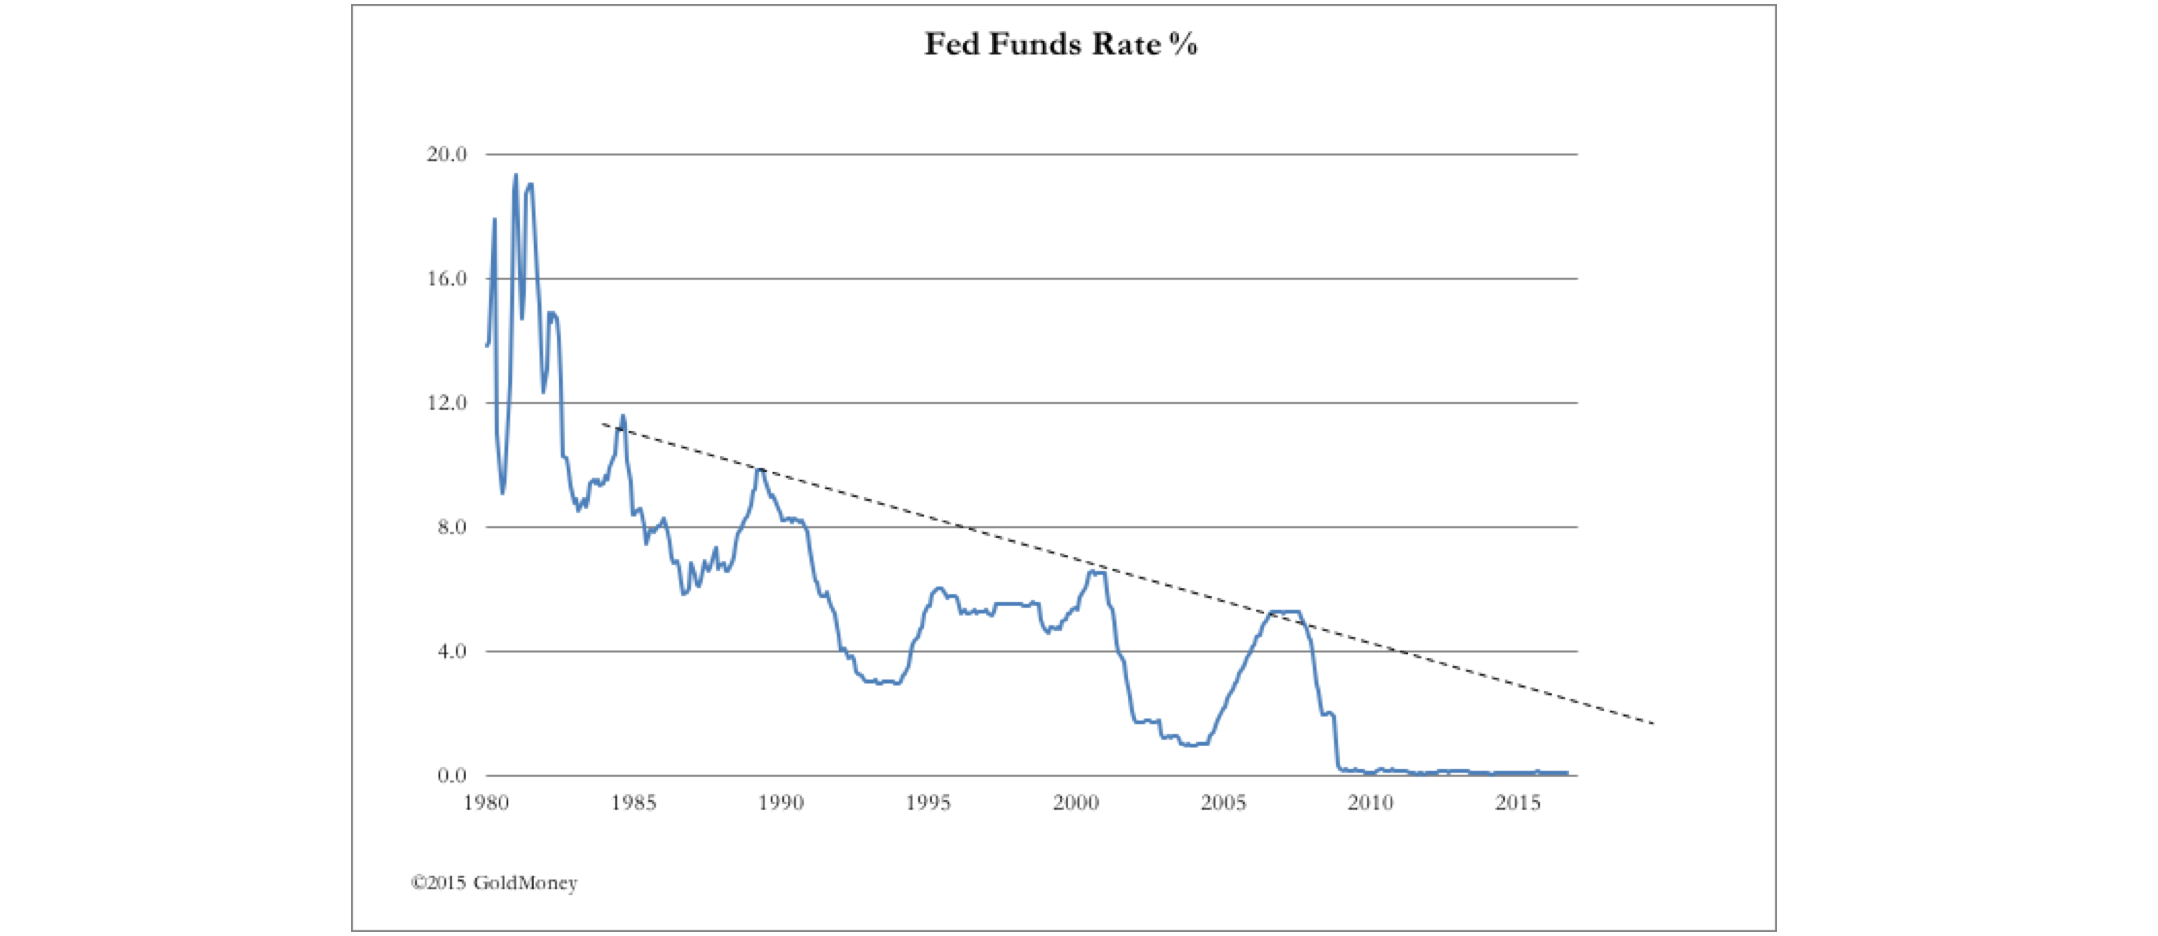 Fed Funds Rate Percentage